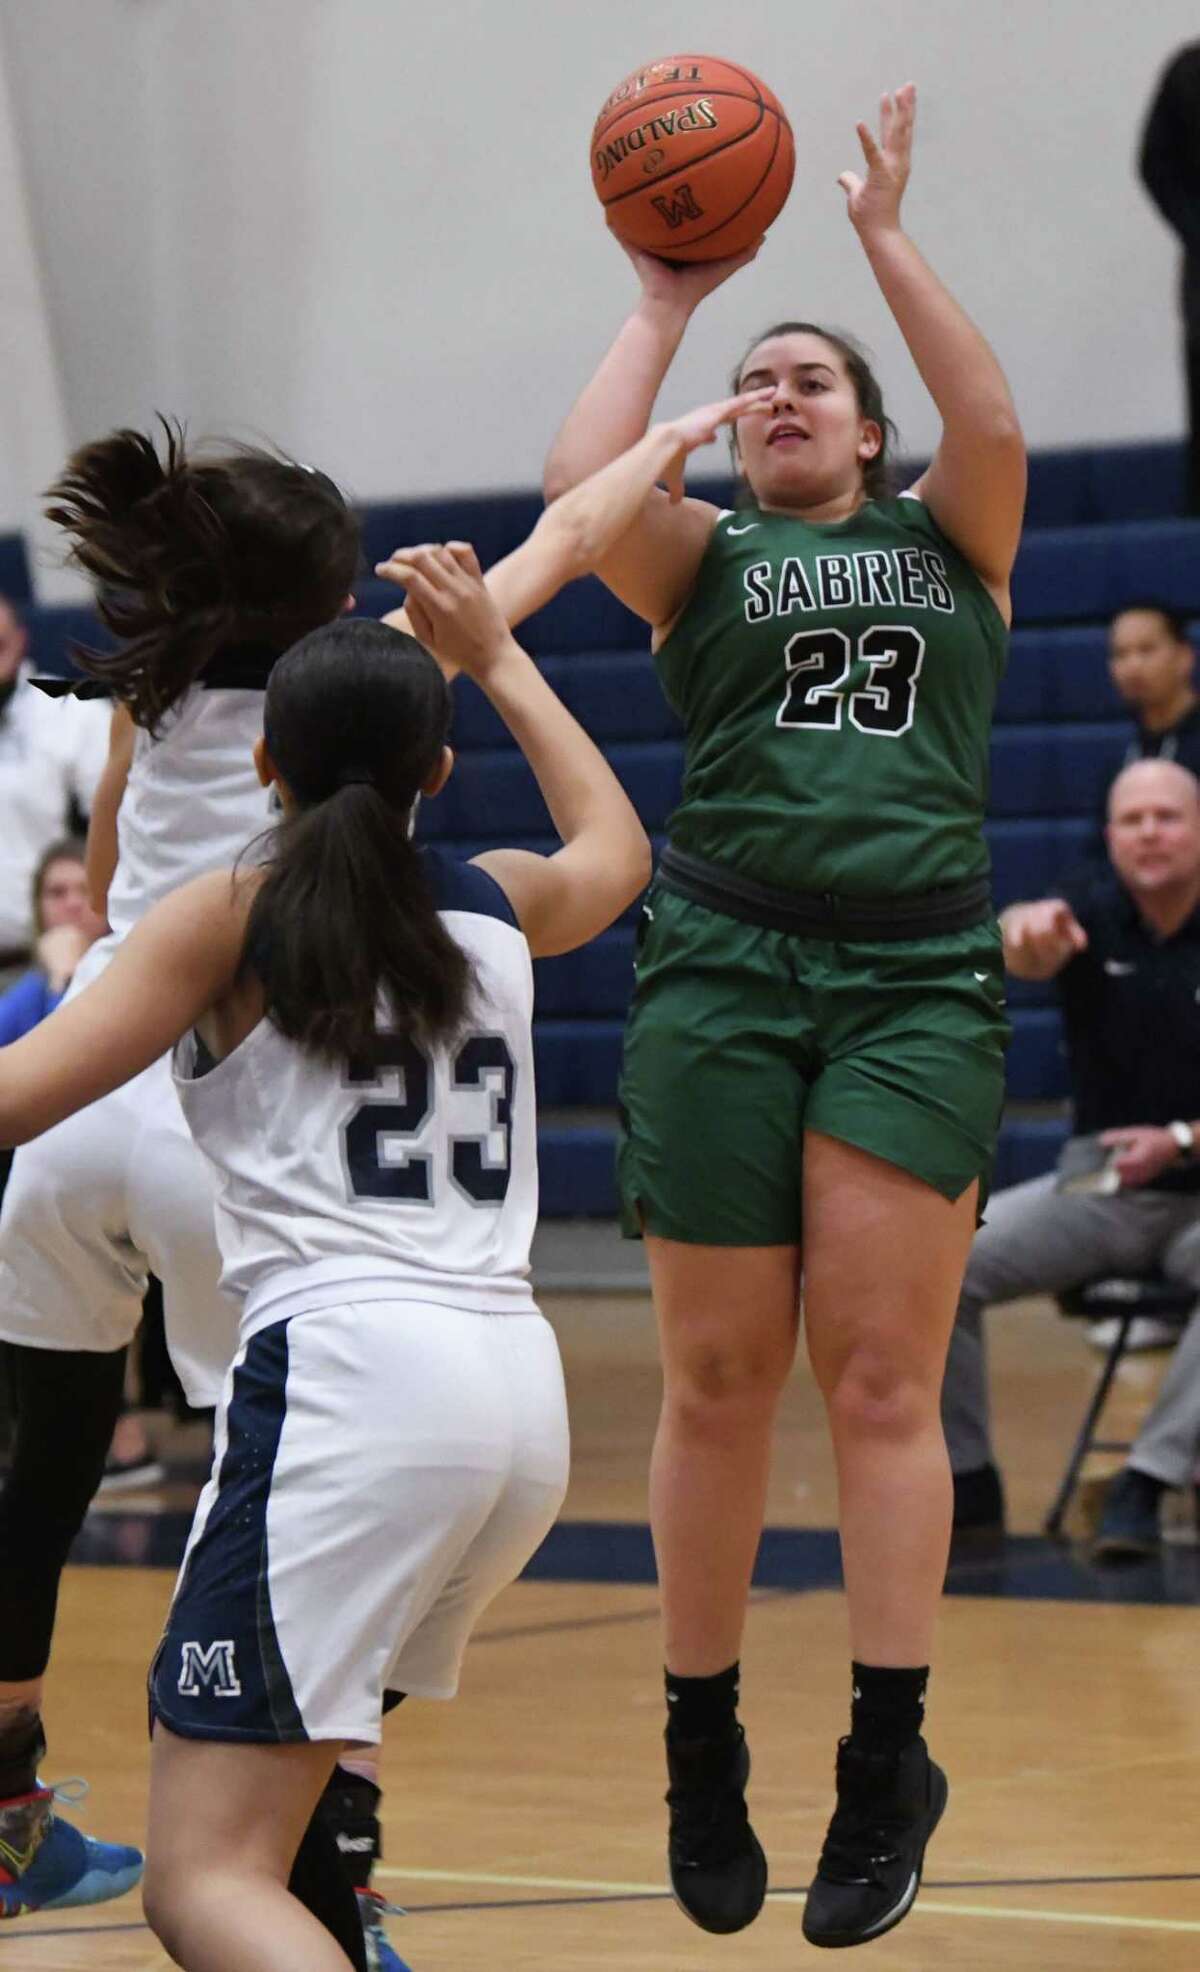 Schalmont's Emily Lenehan takes a shot during a game against Mekeel Christian Academy on Wednesday, Jan. 15, 2020 in Scotia, N.Y. (Lori Van Buren/Times Union)